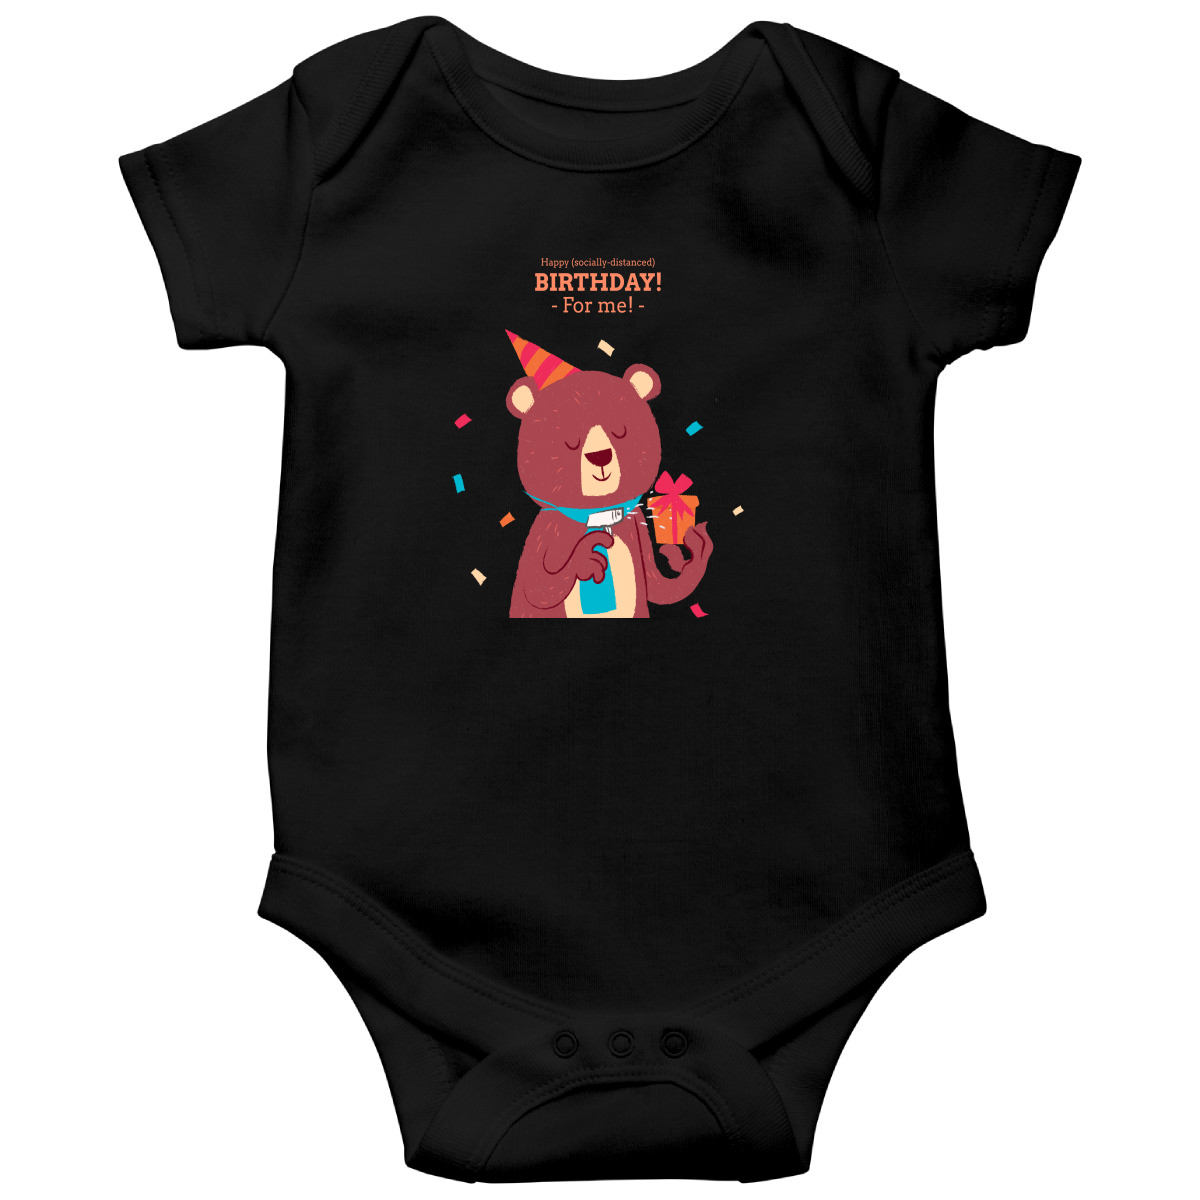 Happy (social distanced) birthday for me  Baby Bodysuits | Black